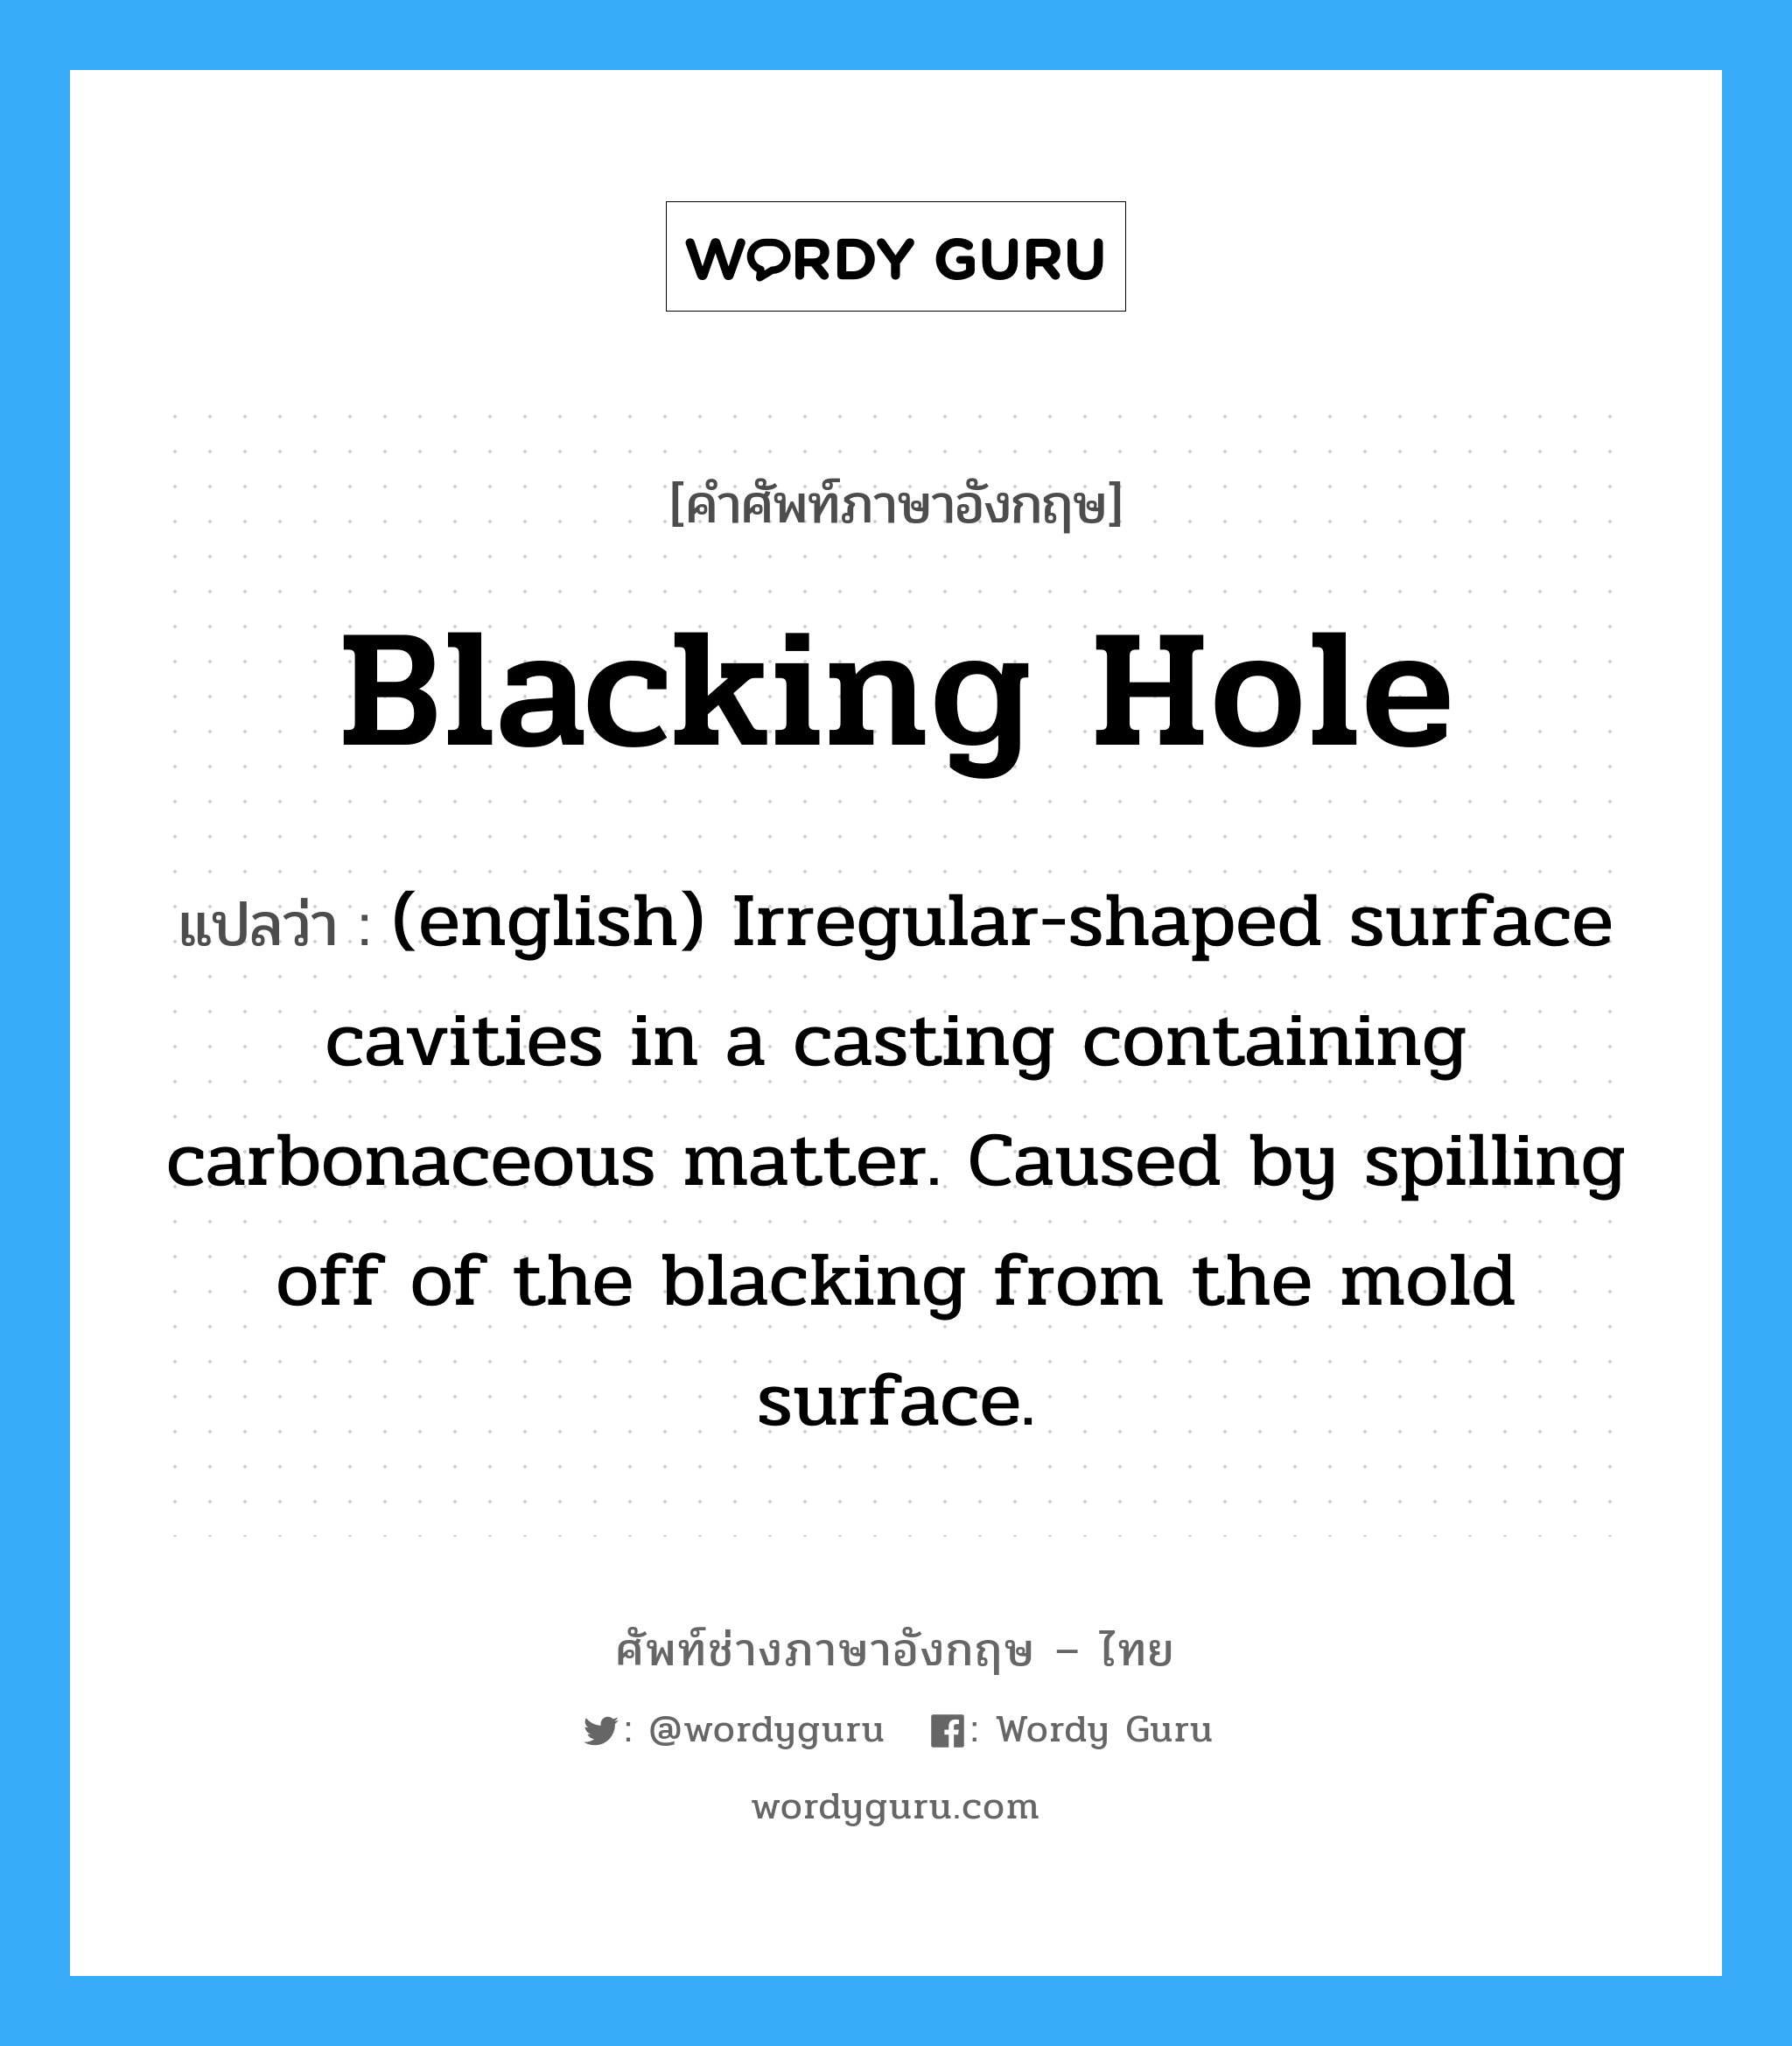 Blacking Hole แปลว่า?, คำศัพท์ช่างภาษาอังกฤษ - ไทย Blacking Hole คำศัพท์ภาษาอังกฤษ Blacking Hole แปลว่า (english) Irregular-shaped surface cavities in a casting containing carbonaceous matter. Caused by spilling off of the blacking from the mold surface.